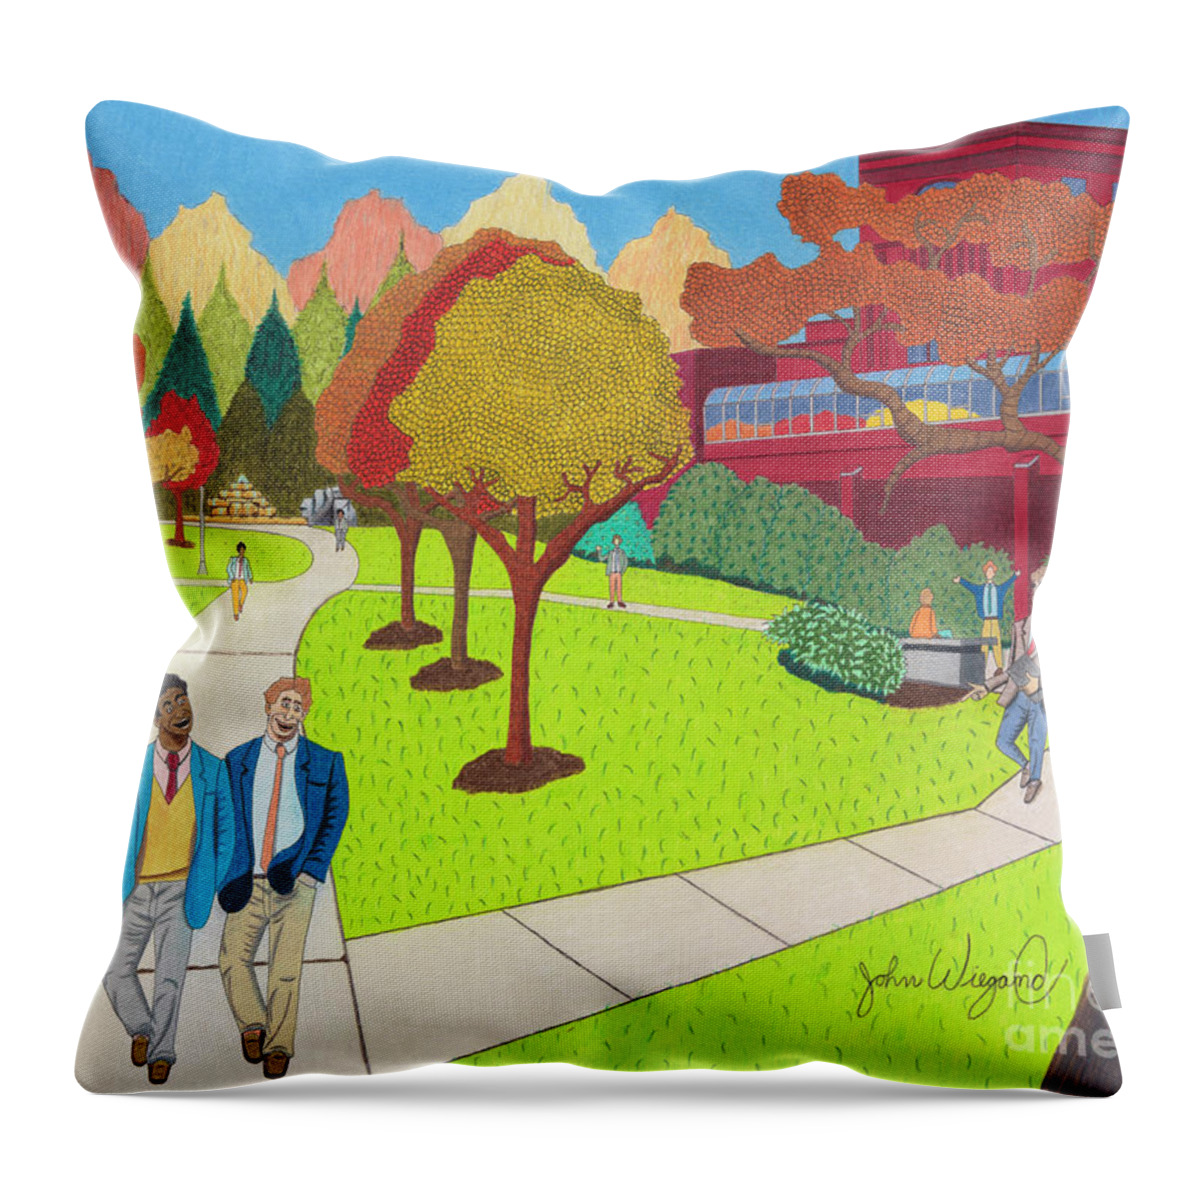 Kiski Throw Pillow featuring the drawing School Ties by John Wiegand